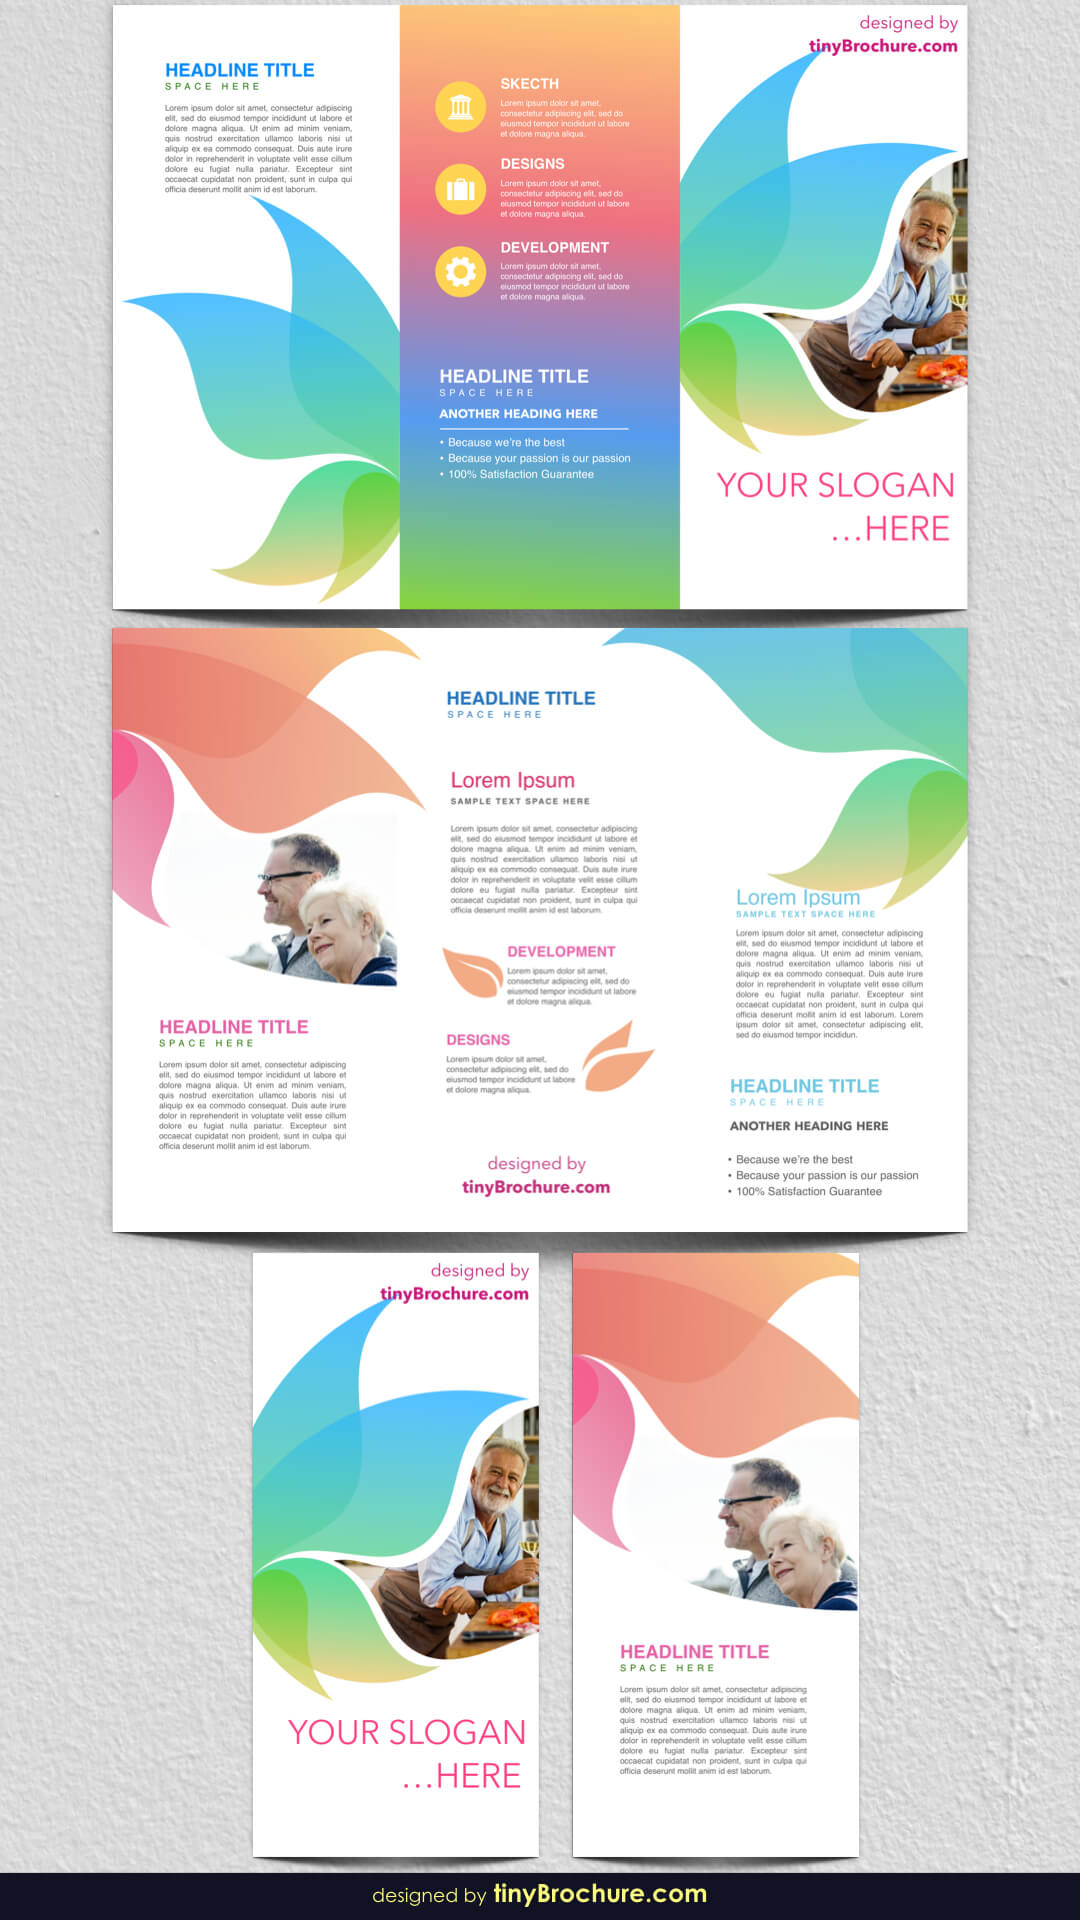 Brochure About Travel | Graphic Design Brochure, Travel Intended For Good Brochure Templates